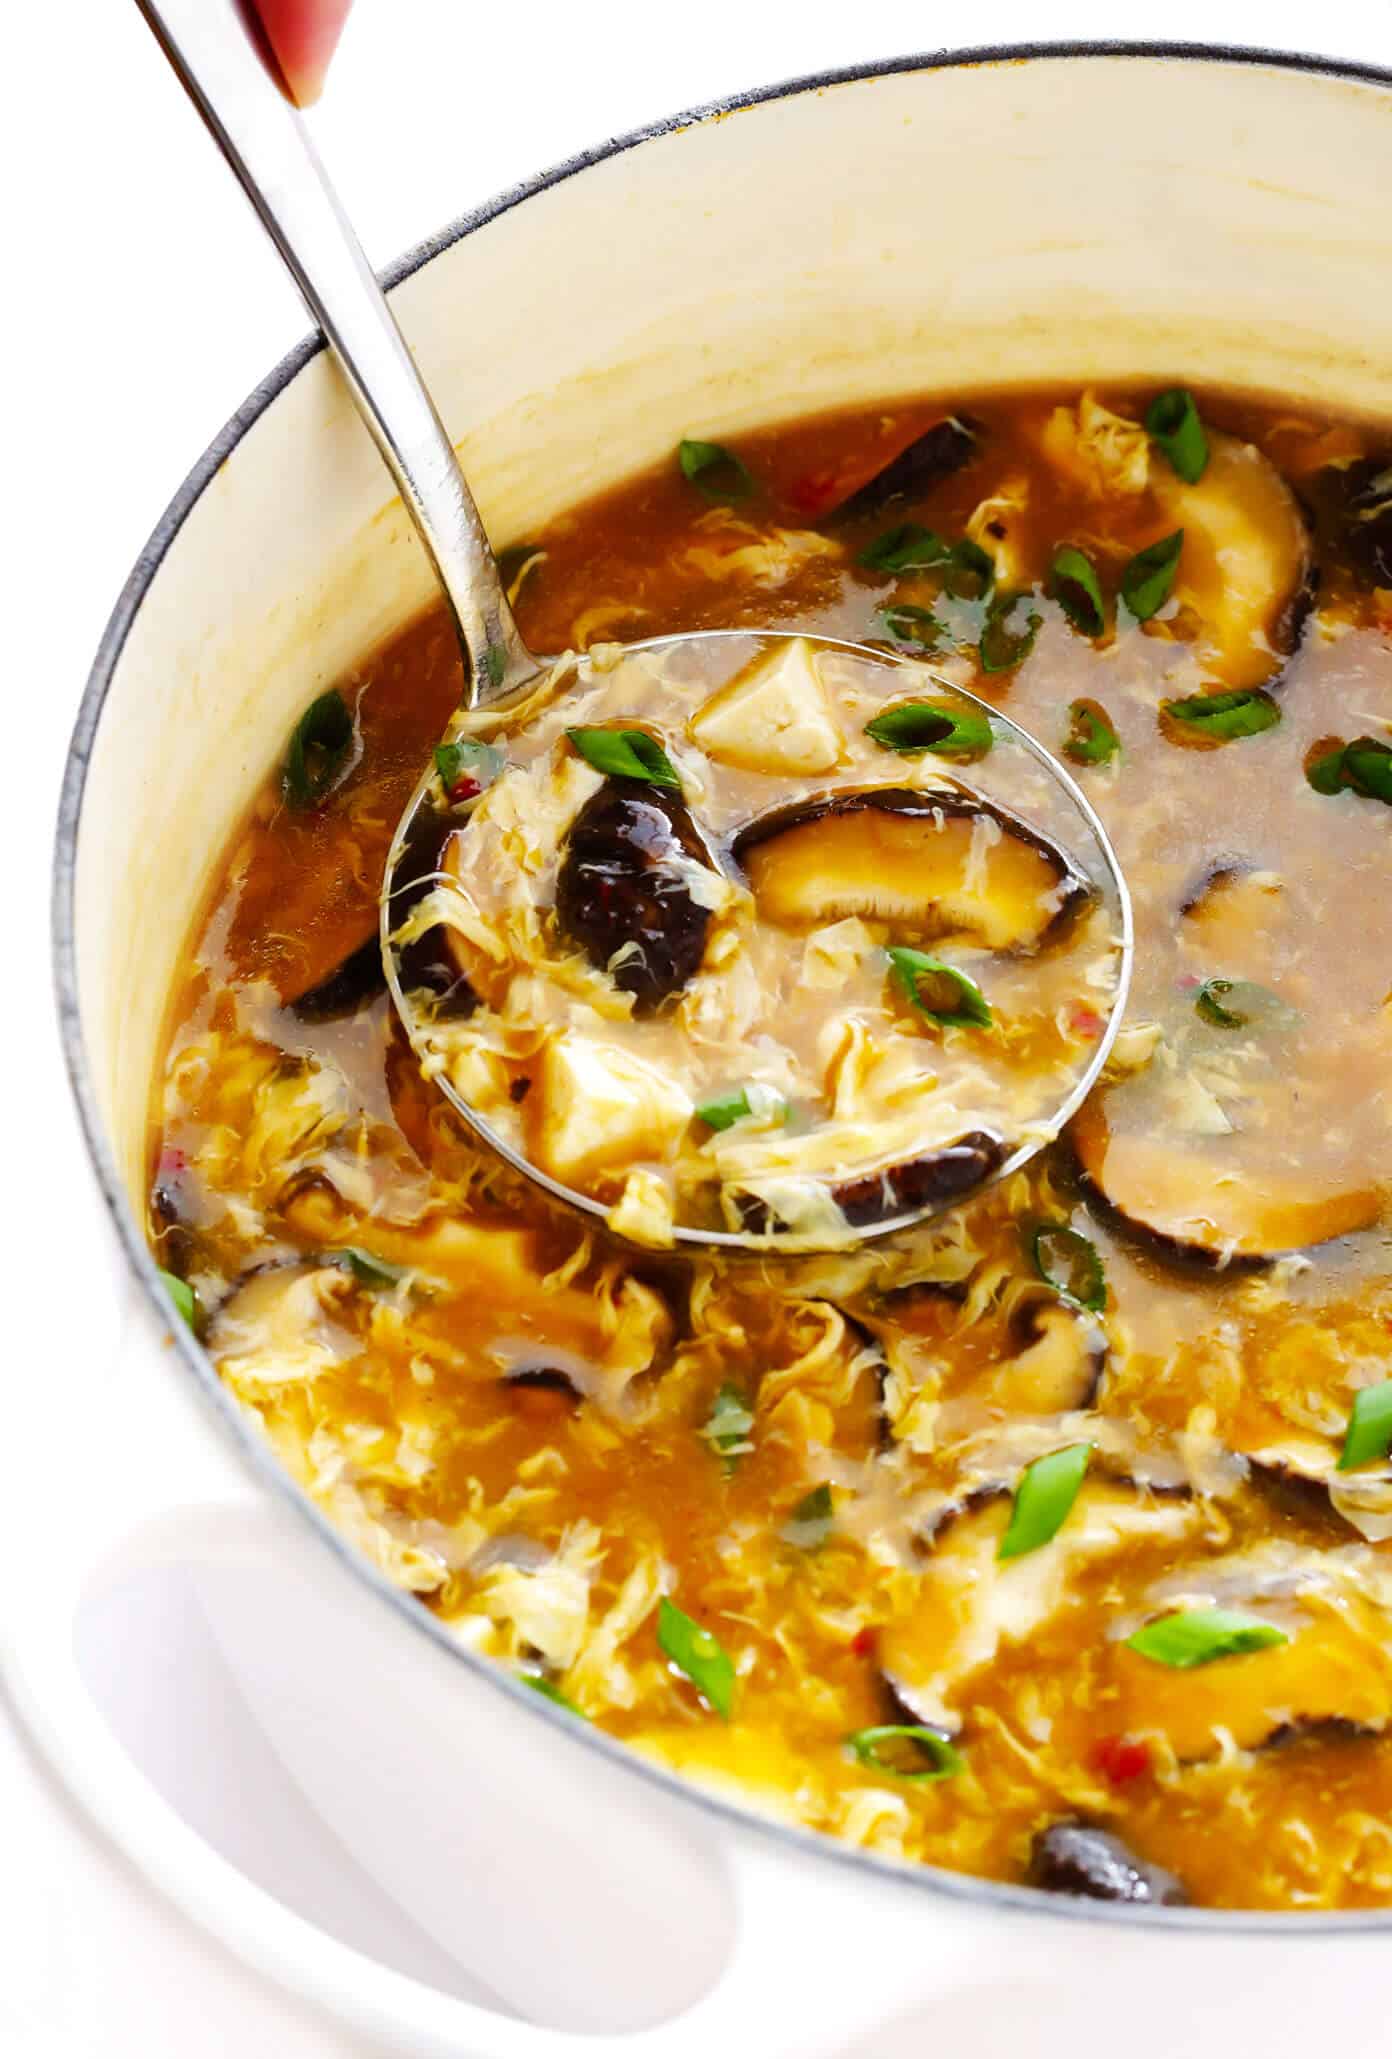 Simple hot and sour soup